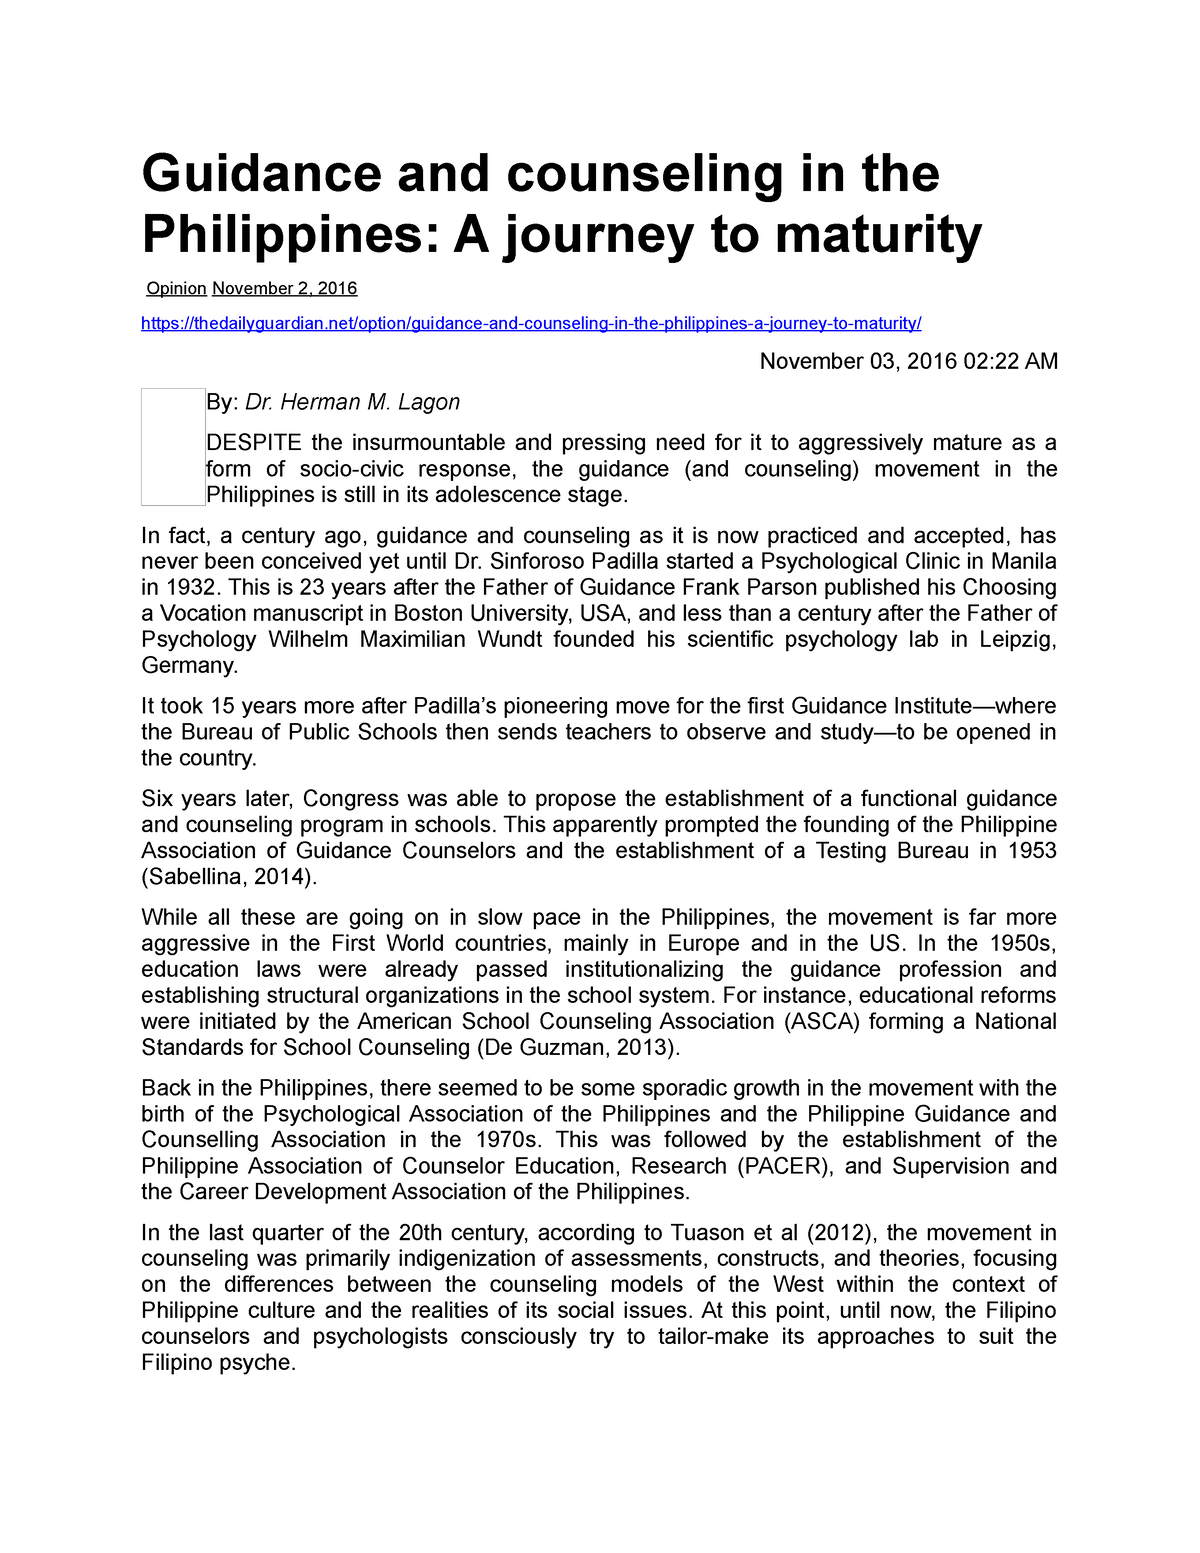 thesis on guidance and counseling in the philippines 2020